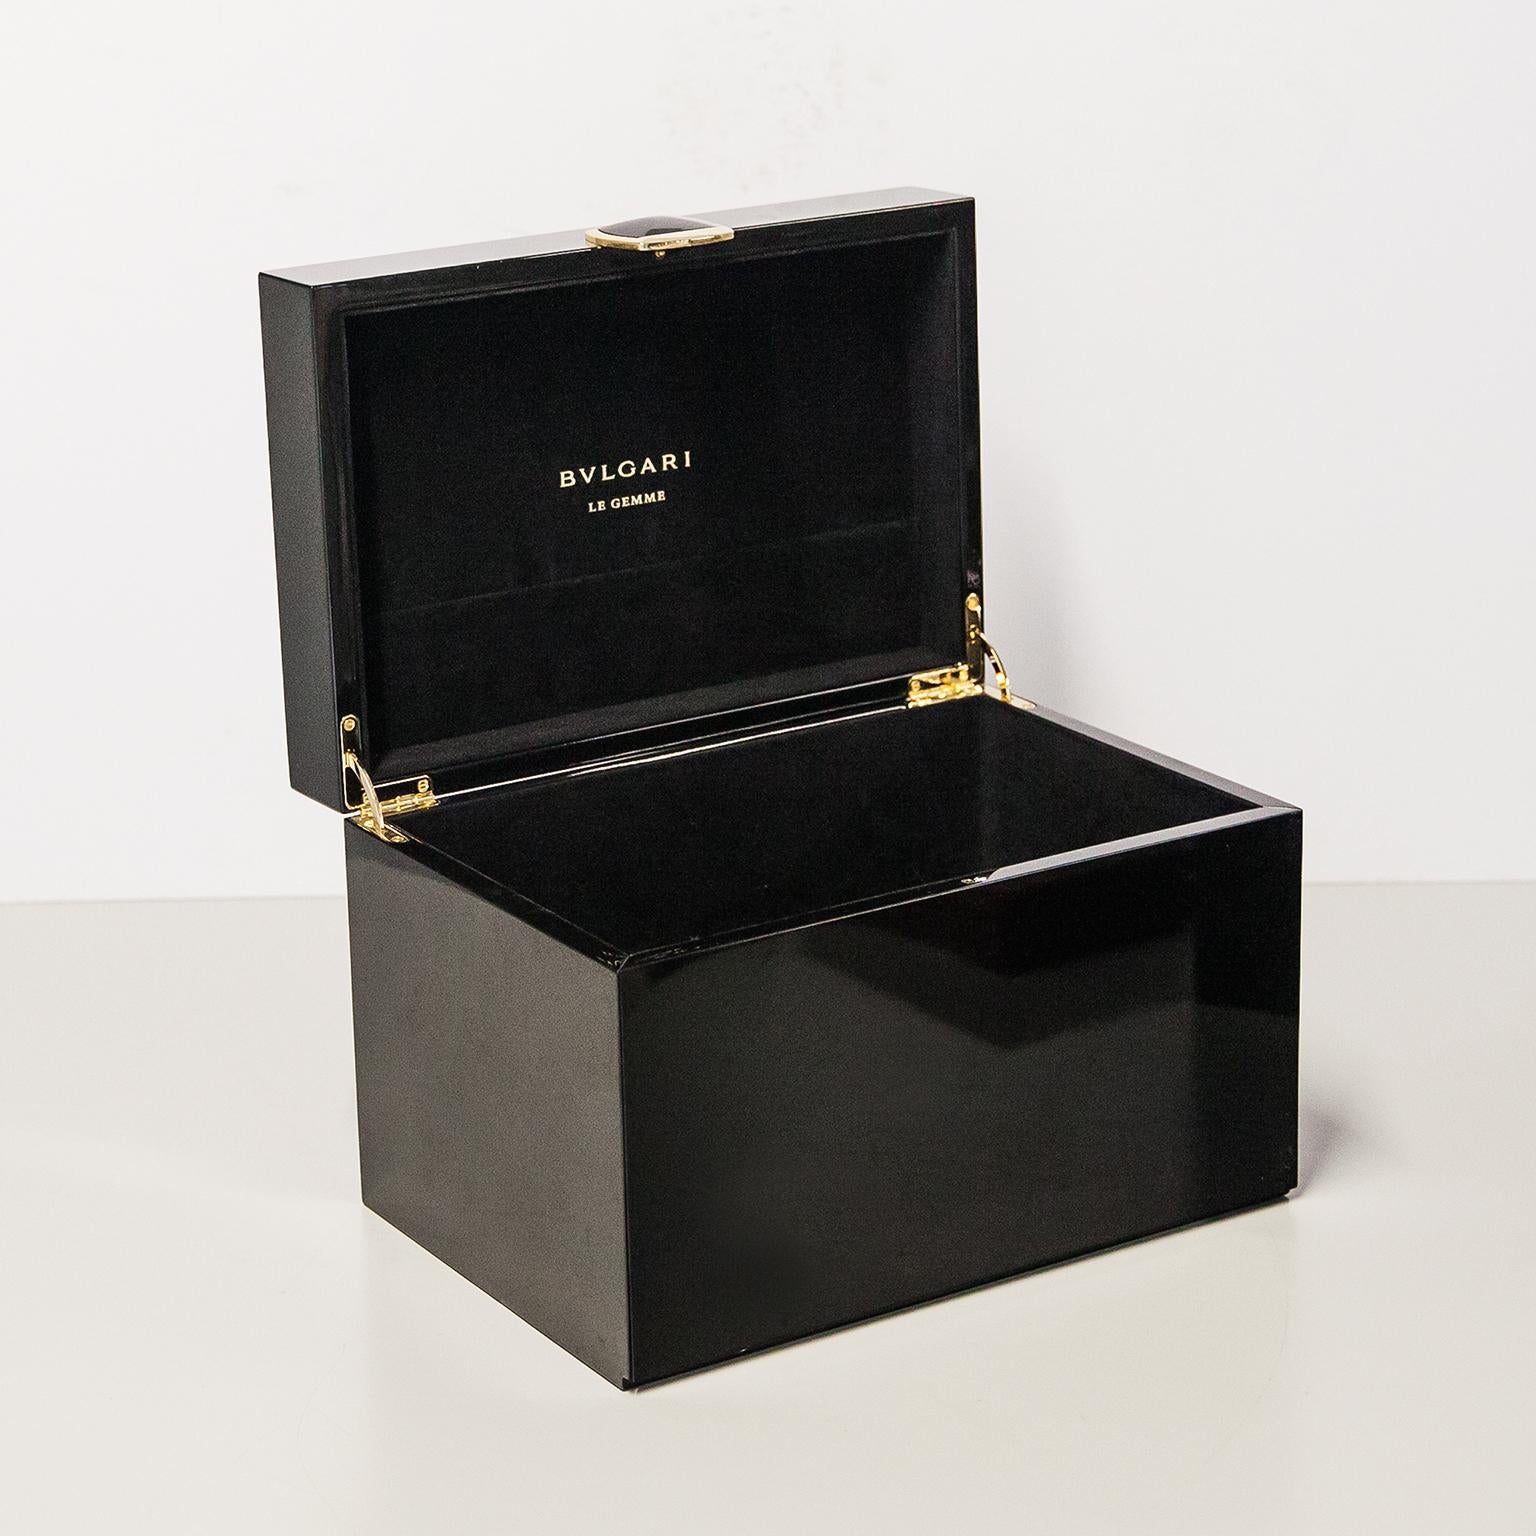 Gilt Huge Bvlgari China Lacquer Jewelry Le Gemme Box For Sale